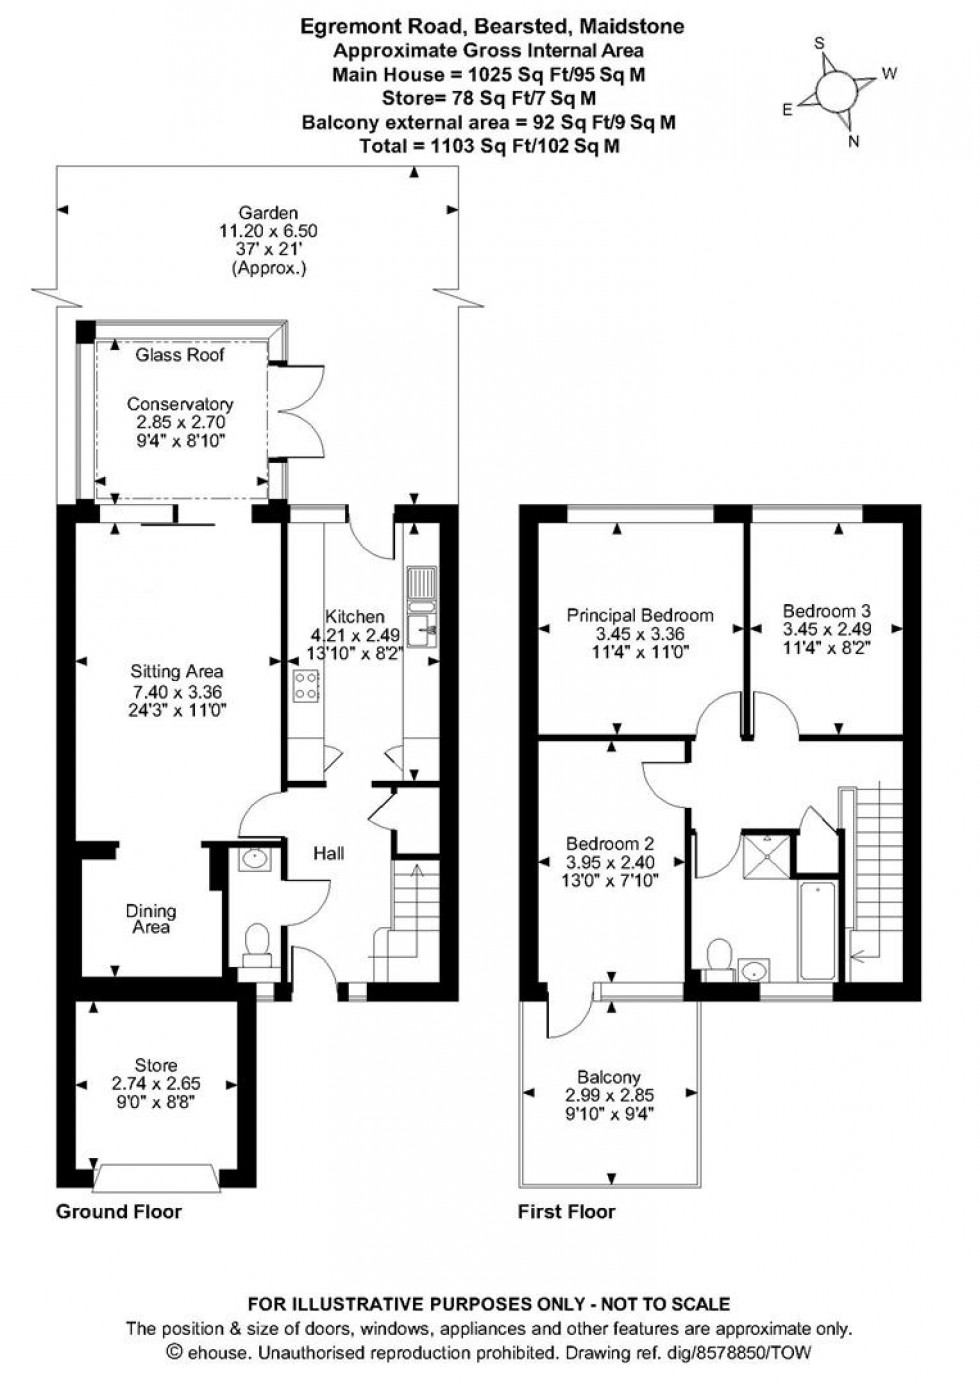 Floorplan for Egremont Road, Bearsted, Maidstone